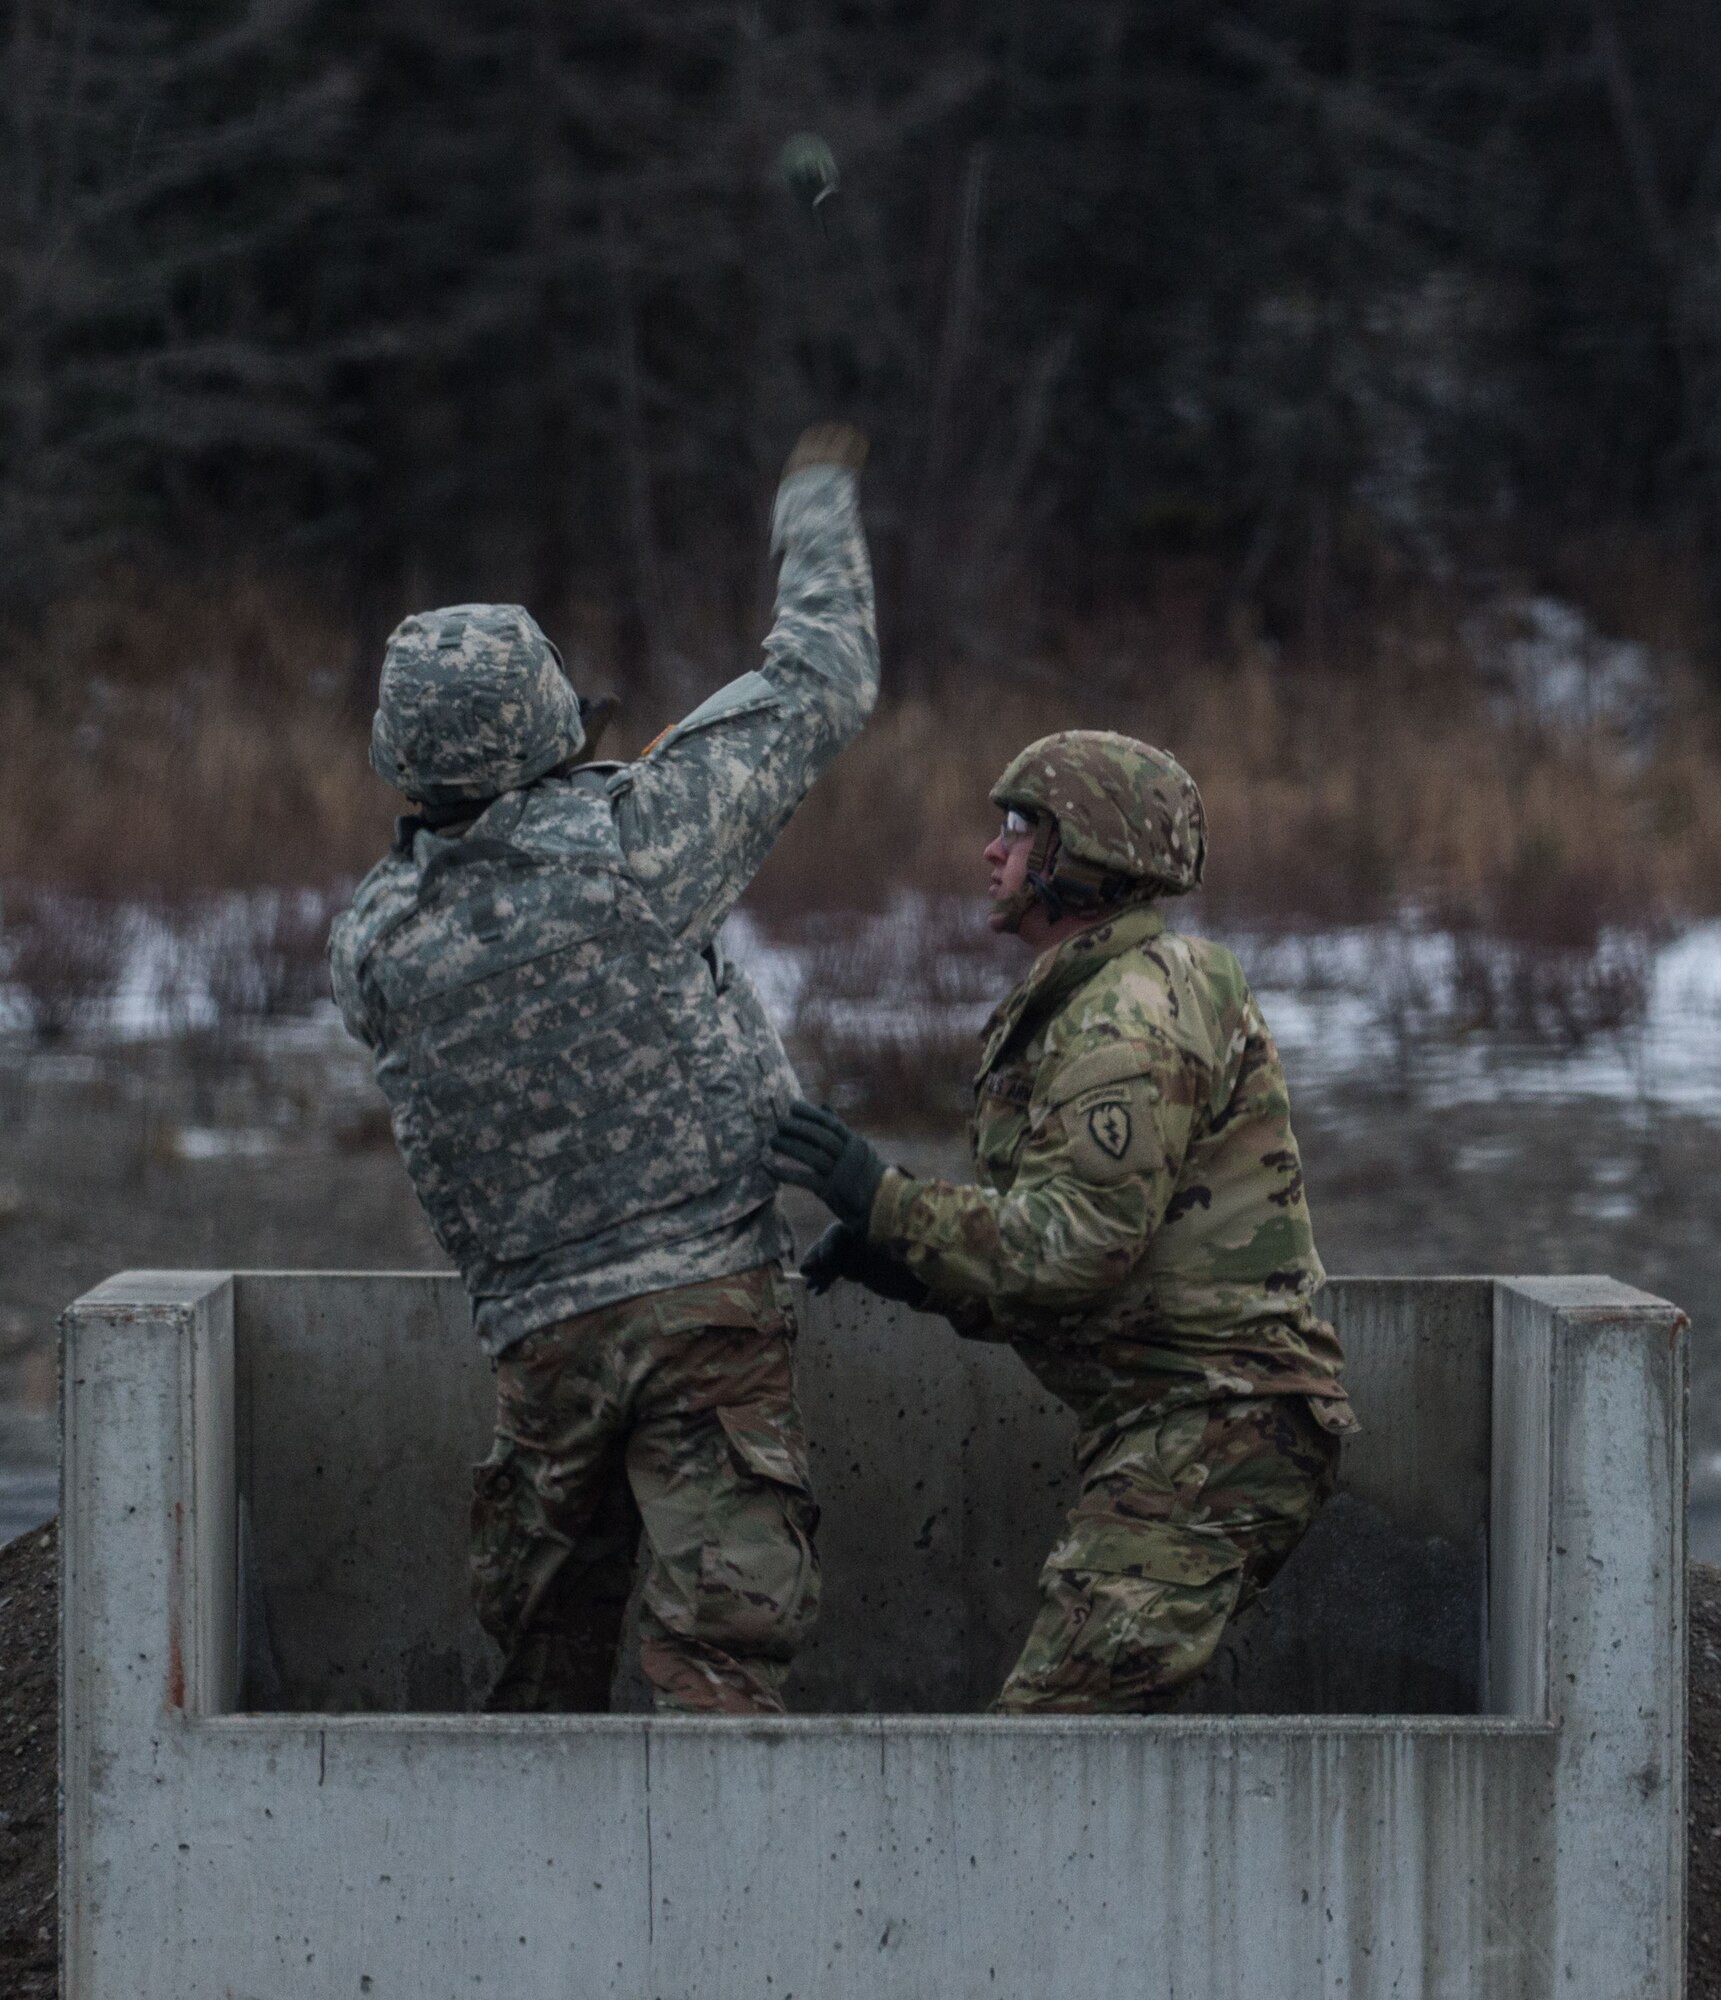 A paratrooper assigned to 3rd Battalion, 509th Parachute Infantry Regiment, 4th Infantry Brigade Combat Team (Airborne), 25th Infantry Division, U.S. Army Alaska, throws an M67 fragmentation grenade during live fire training at Kraft Range on Joint Base Elmendorf-Richardson, Alaska, Dec. 12, 2017. A ‘pit’ noncommissioned officer supervised the Soldiers throwing grenades to maintain a safe instructional environment, enforce precaution standards, and direct them on proper handling of explosives. The fragmentation hand grenade has a lethal radius of five meters and can produce casualties up to 15 meters, dispersing fragments as far as 230 meters.